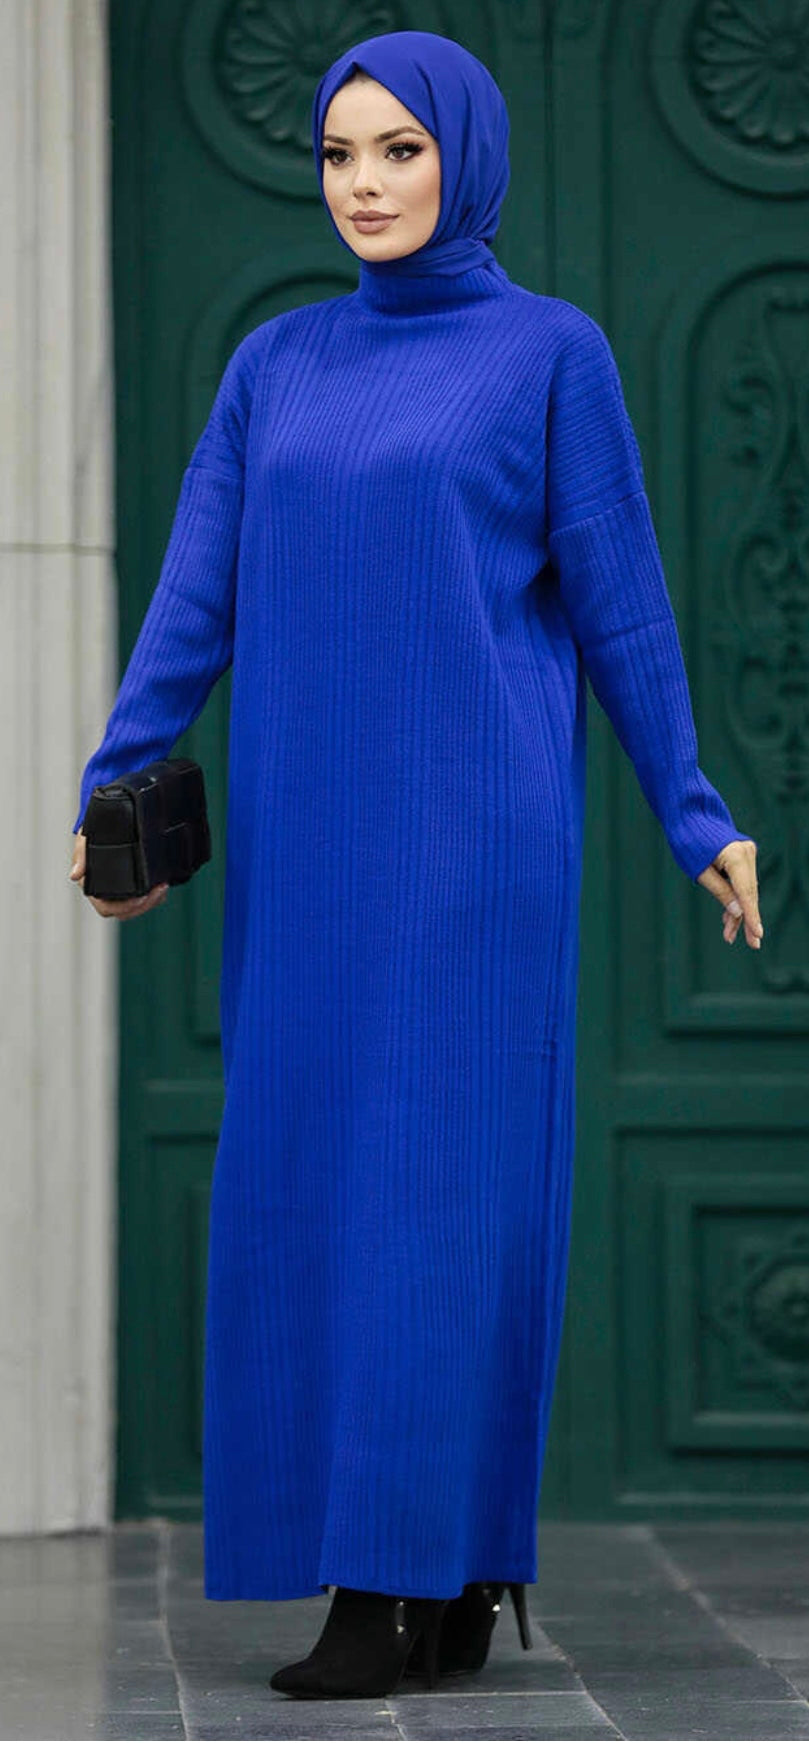 Polo neck-Knitted Dress